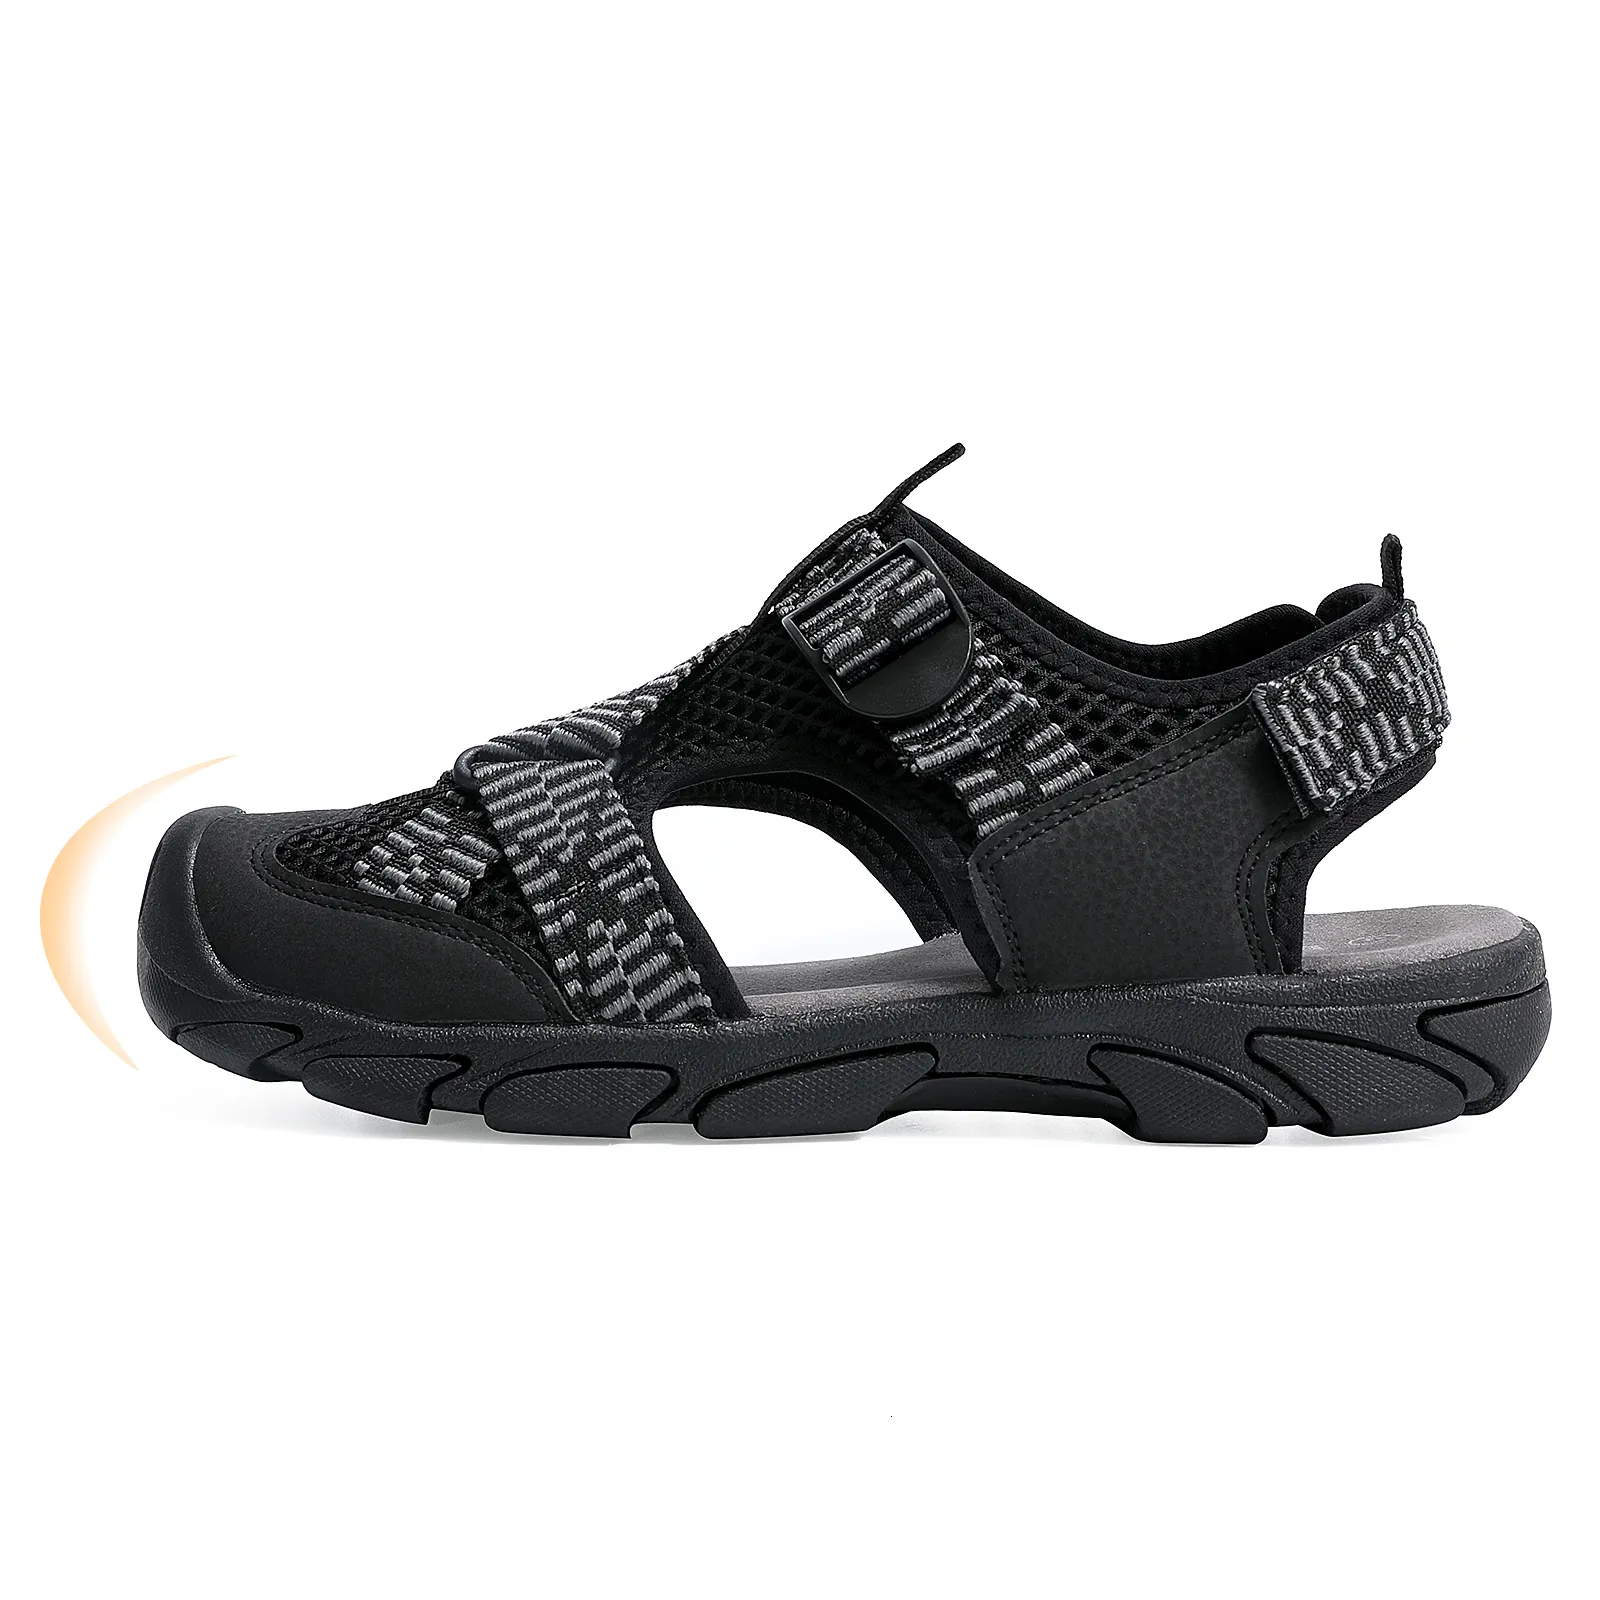 Paragon Women's Footwear - Buy Paragon Women's Footwear Online at Best  Prices on Snapdeal